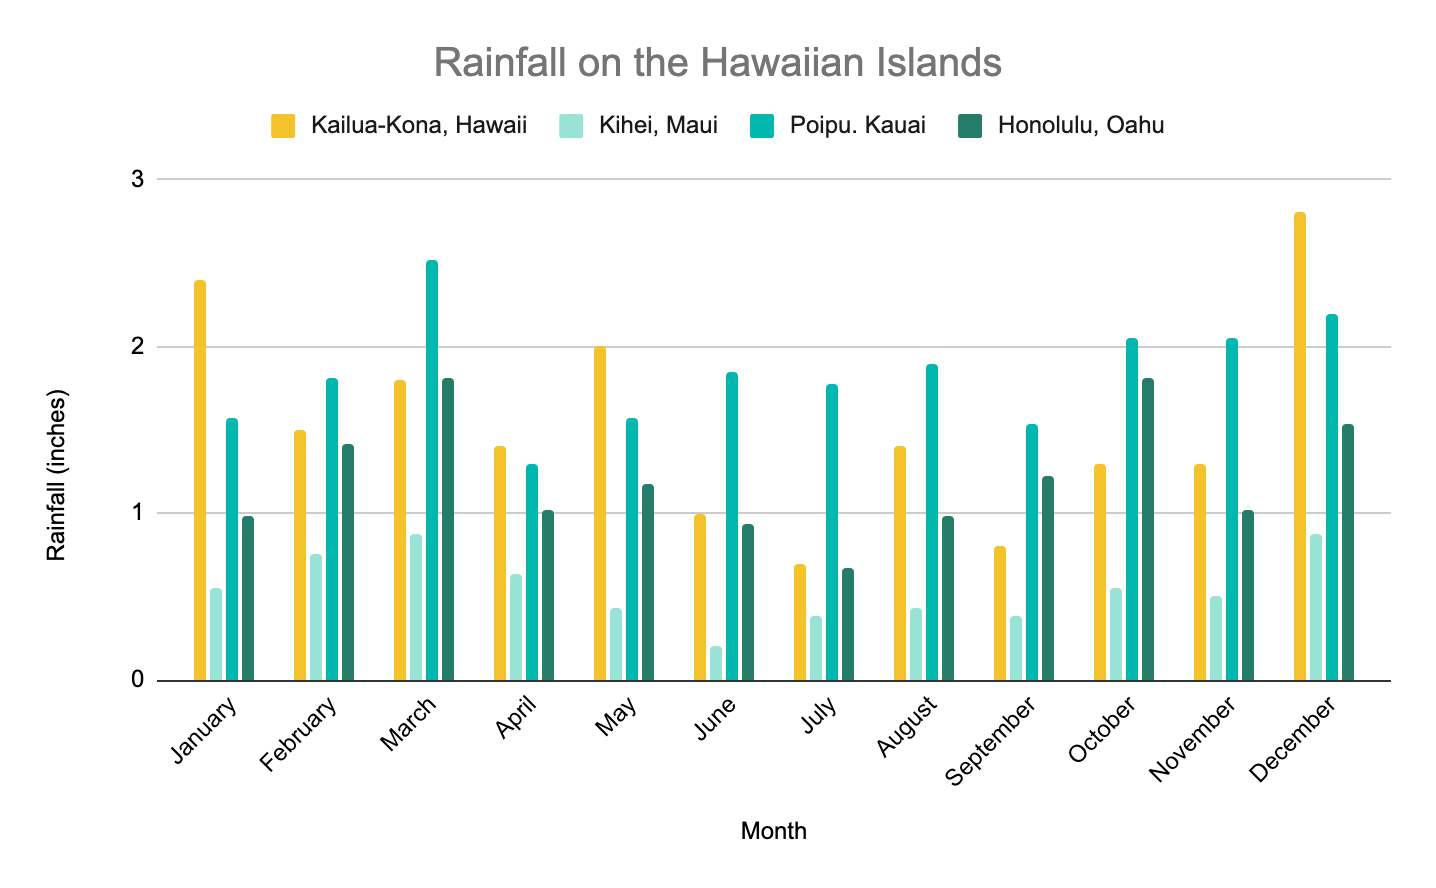 Chart of rainfall on the Hawaiian Islands throughout the year